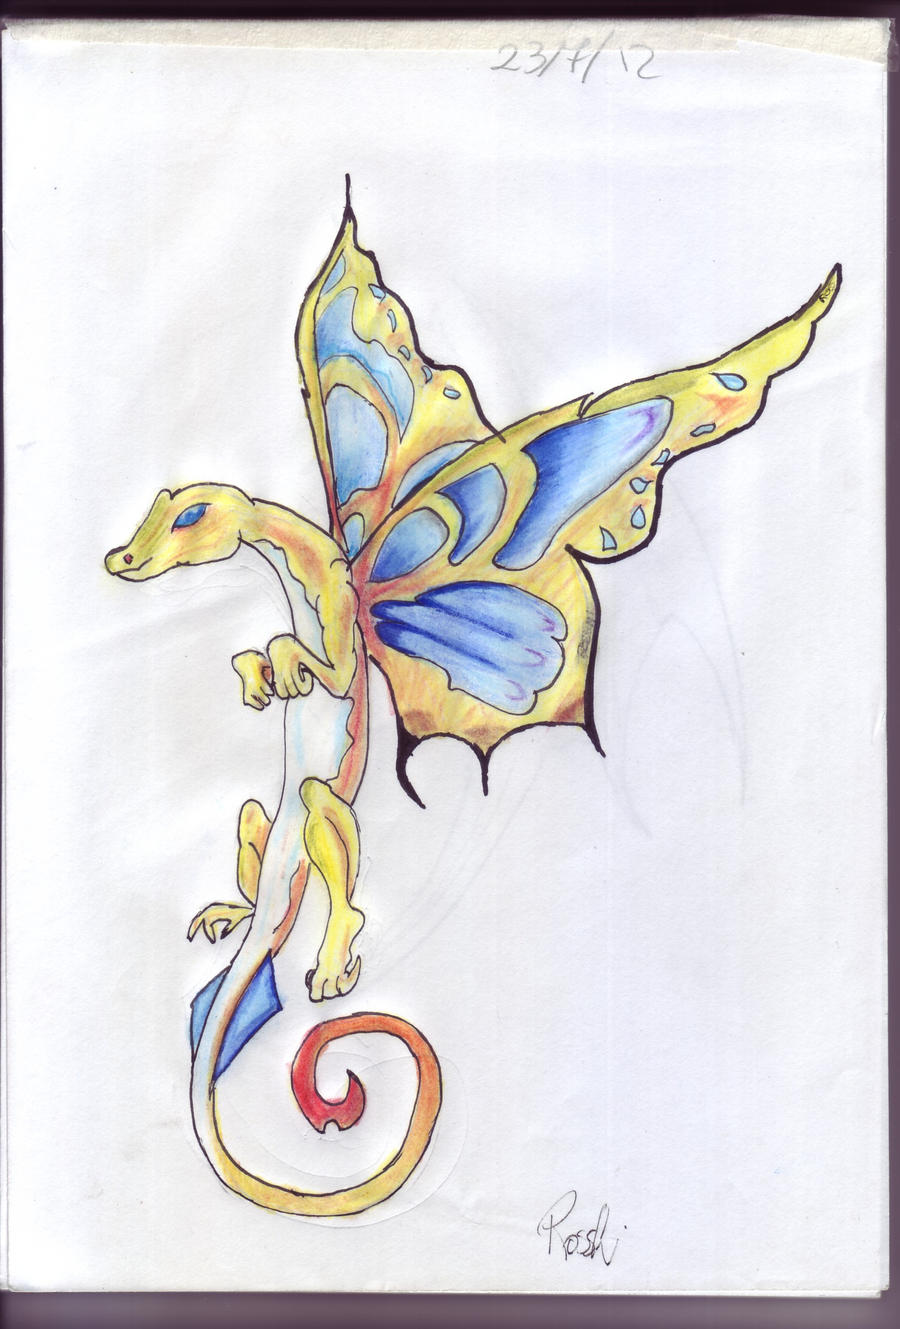 Butterfly dragon by Rosshi on DeviantArt